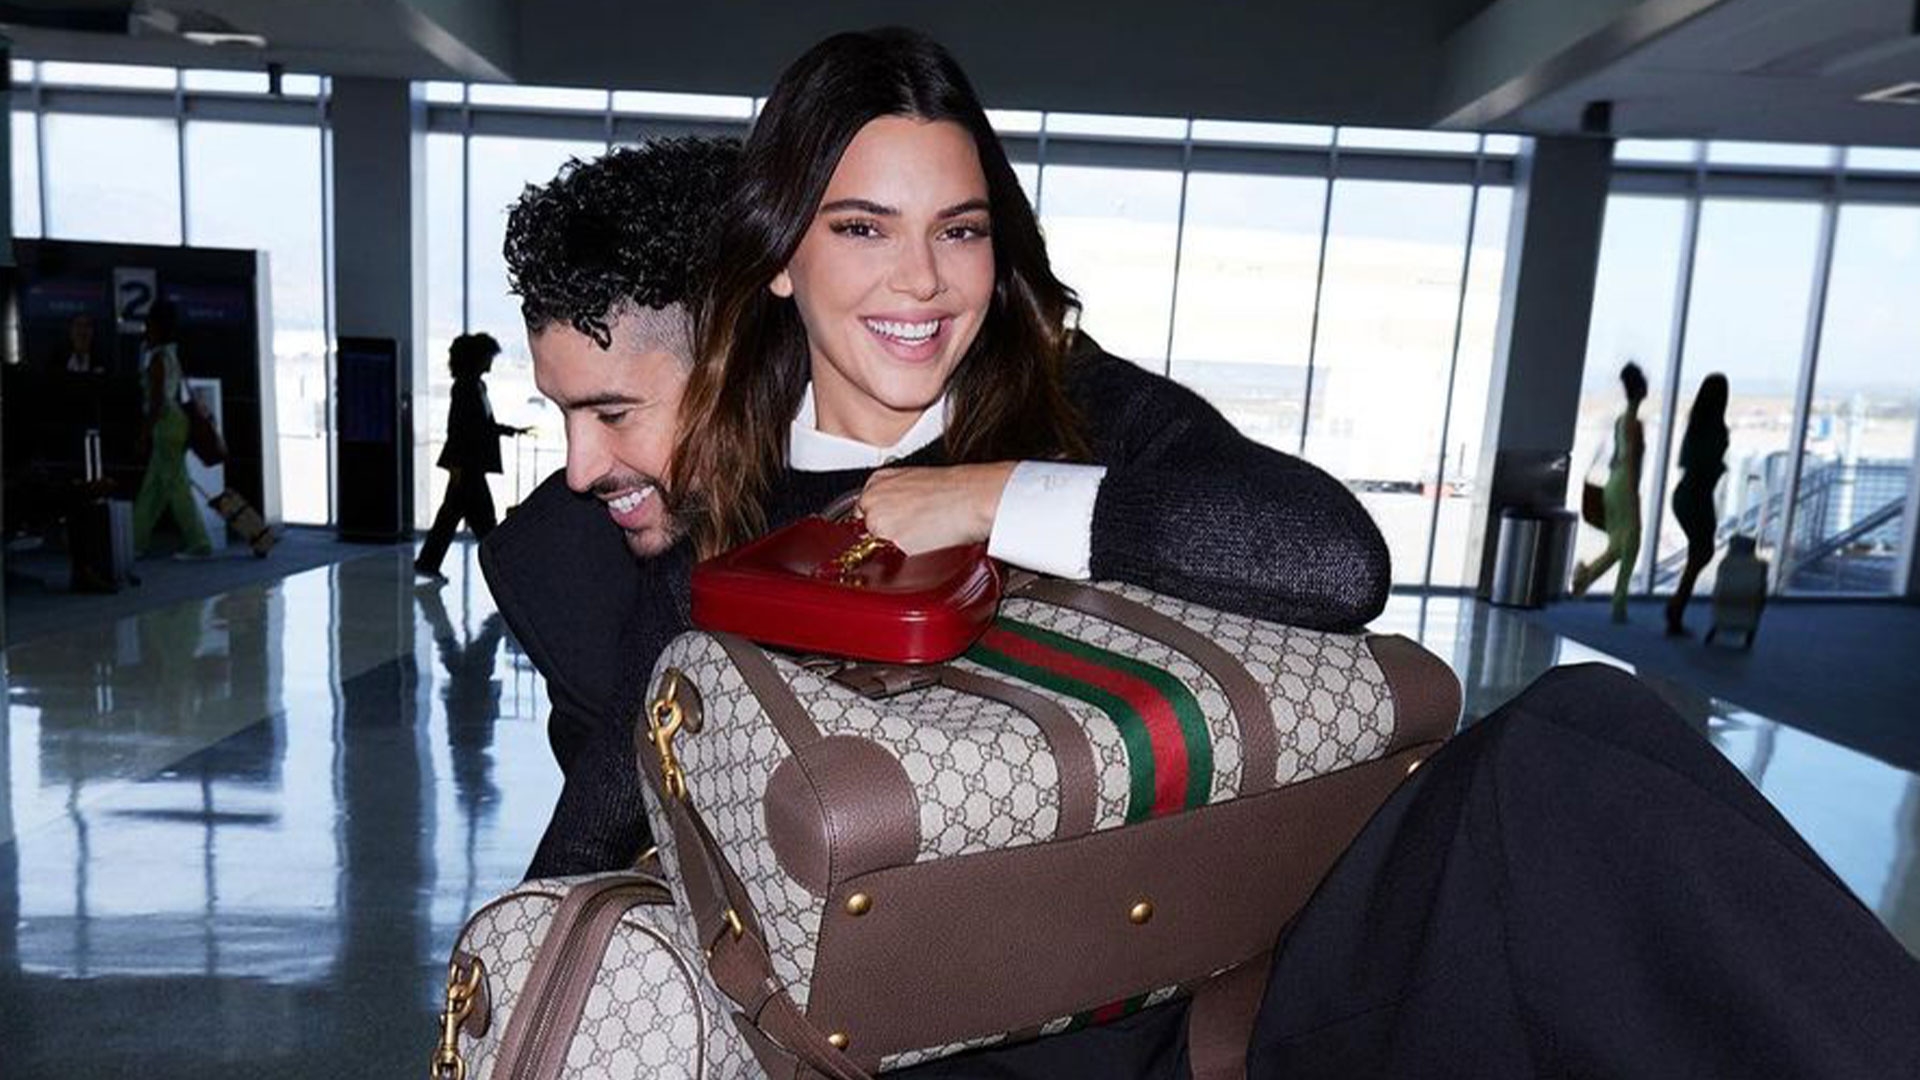 Kendall Jenner And Bad Bunny's Chemistry Is Star Of Gucci's Campaign